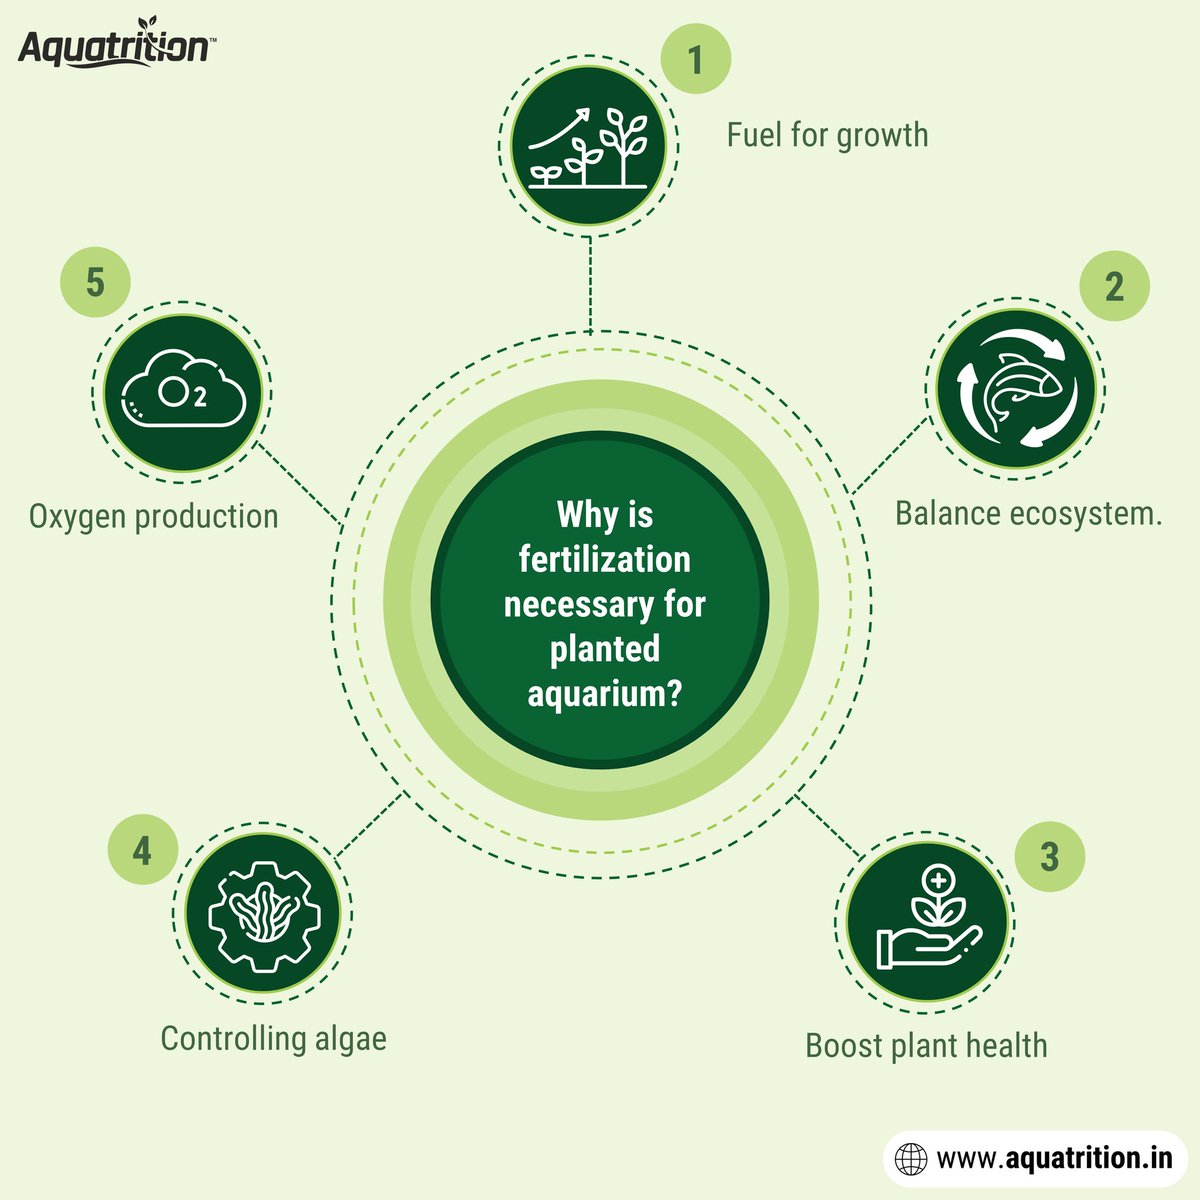 Dive into the secret to thriving underwater worlds: Why is fertilization necessary for planted aquarium?
Let's keep those fins flapping and plants blooming!
*
*
🌿Nourished by Aquatrition
*
#AquariumCare #aquatrition #aquatritiontips
#FishTankTips #AquariumCommunity